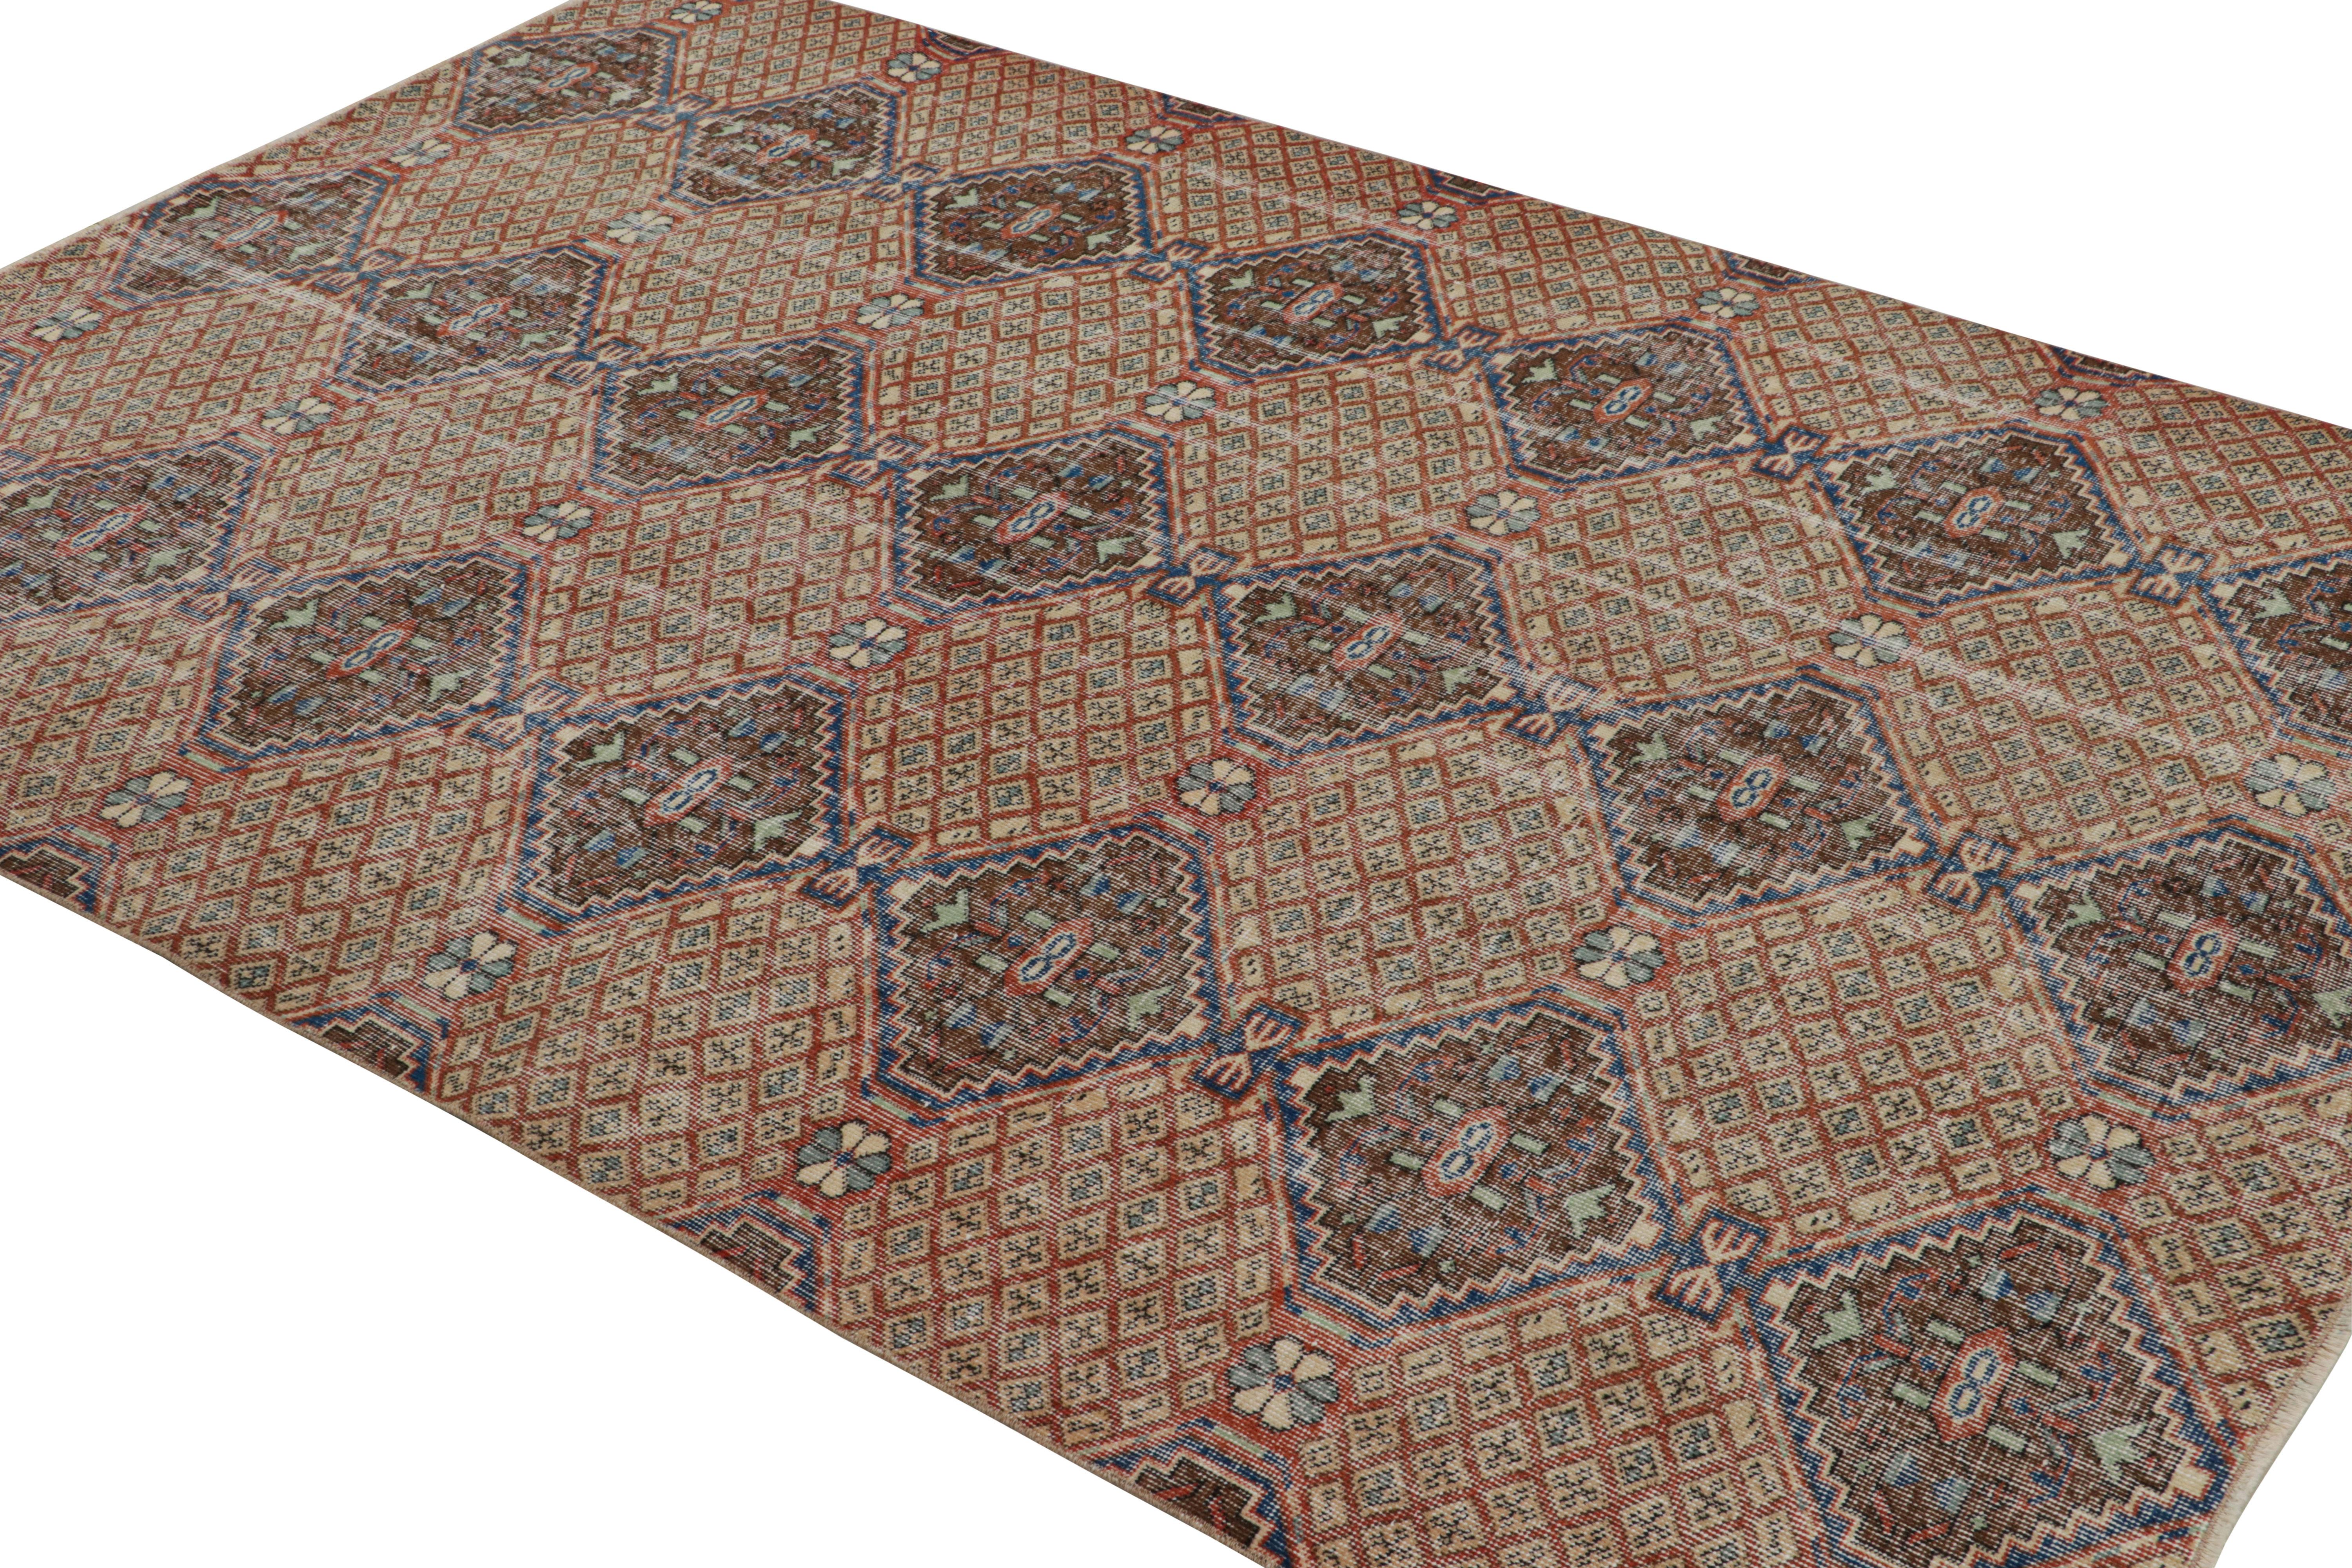 Handknotted in wool, this 6x9 vintage rug originates from Turkey, circa 1960-1970, and is believed to be among the works of mid-century designer Zeki Múren. 

On the Design:

In this piece, brown, red and blue tones underscore geometric patterns